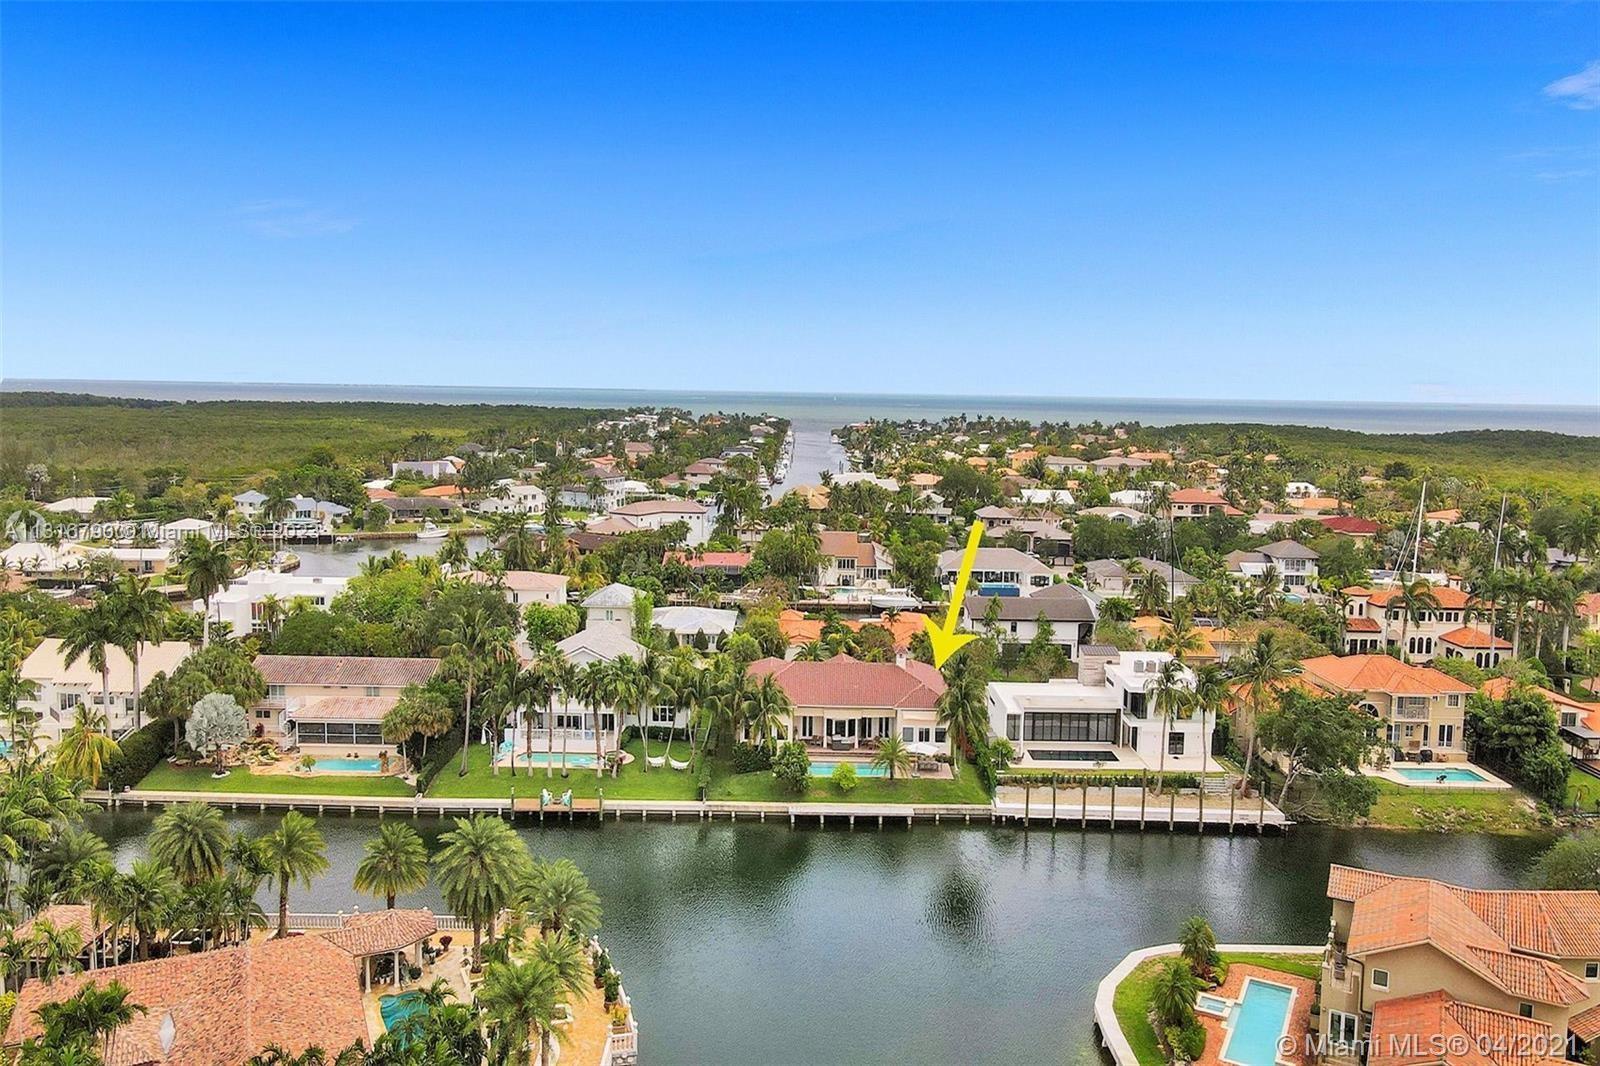 Stunning, split level waterfront mansion located in guard-gated Gables By The Sea, boasts the most picturesque setting for Florida's sunsets. Situated on a unique, T-style, wide section of the waterway with endless water views, the property has 5 bedrooms with master on the first floor. All rooms on the first floor including the bedroom, kitchen, breakfast area, formal dining with large windows, living room with fireplace,& oversized family room ALL HAVE WATER VIEWS AND 15' HIGH CEILINGS. The covered patio with retractable awnings overlooks the swimming pool and the water. There is a separate laundry room with ample cupboards, and the house has 2 x 2 car garages. Gables by the Sea is a treelined, tranquil & serene community located beside Gulliver Prep, a private day school.